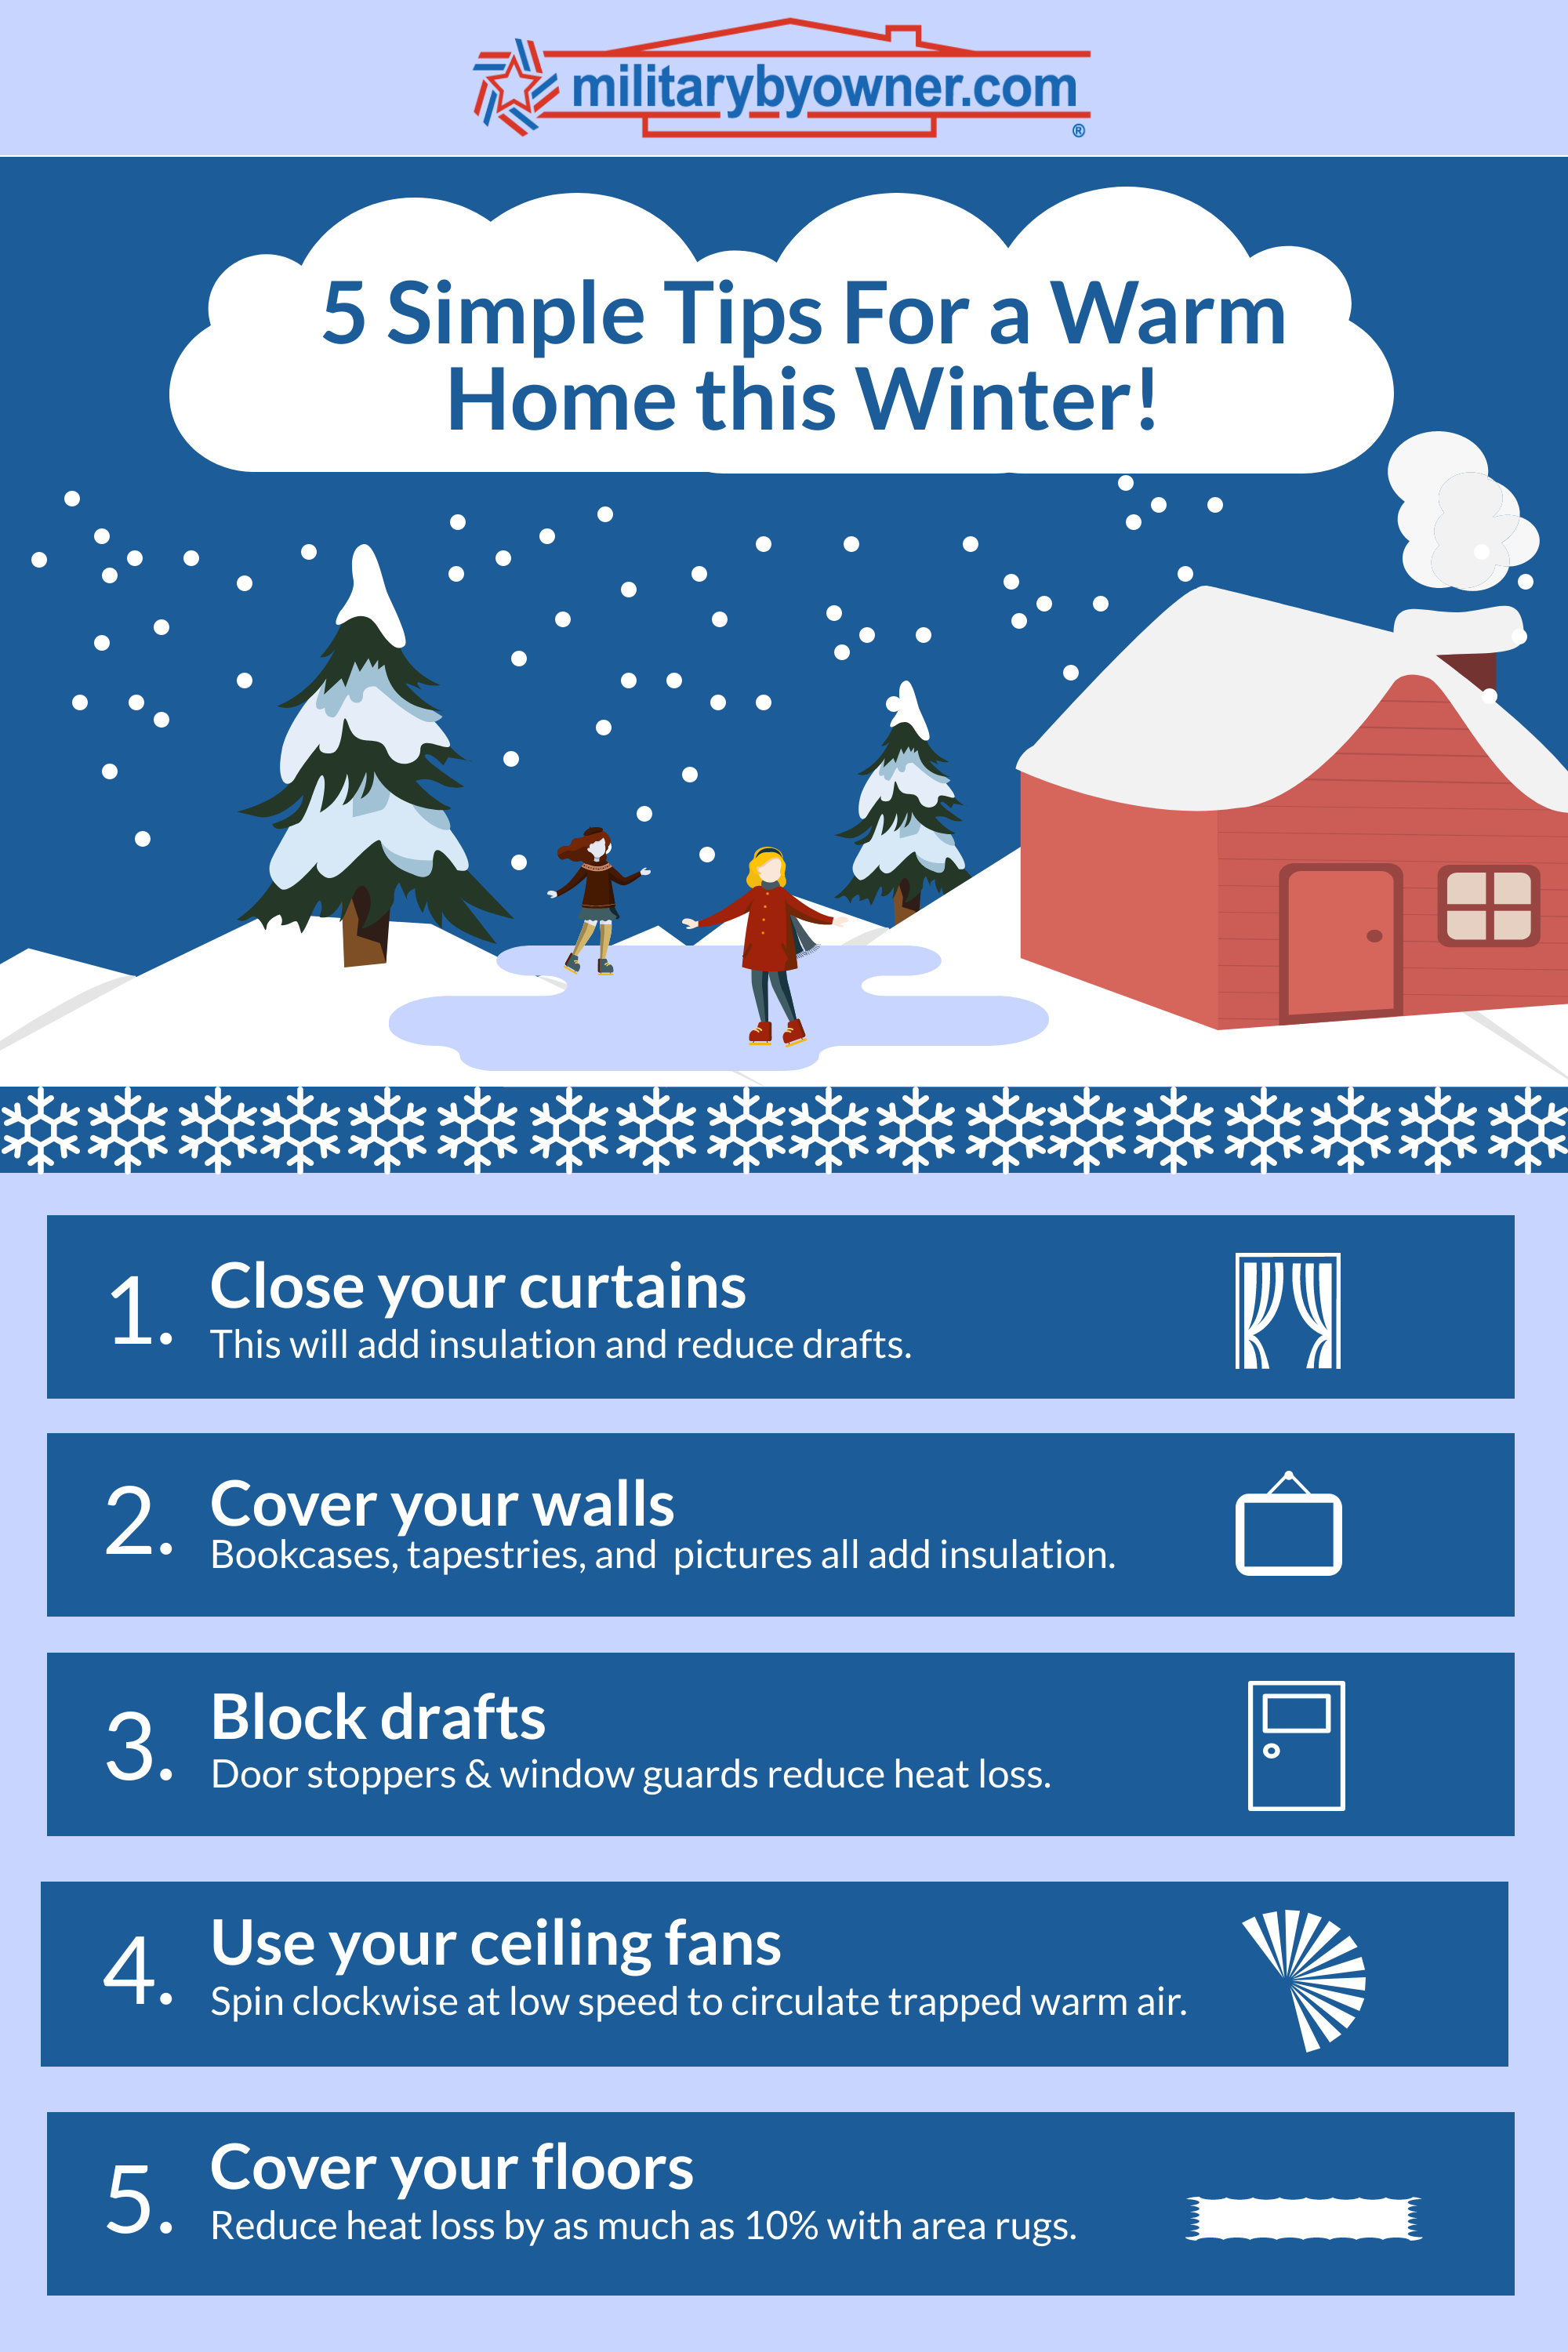 5 Simple tips to keep your home warm in winter